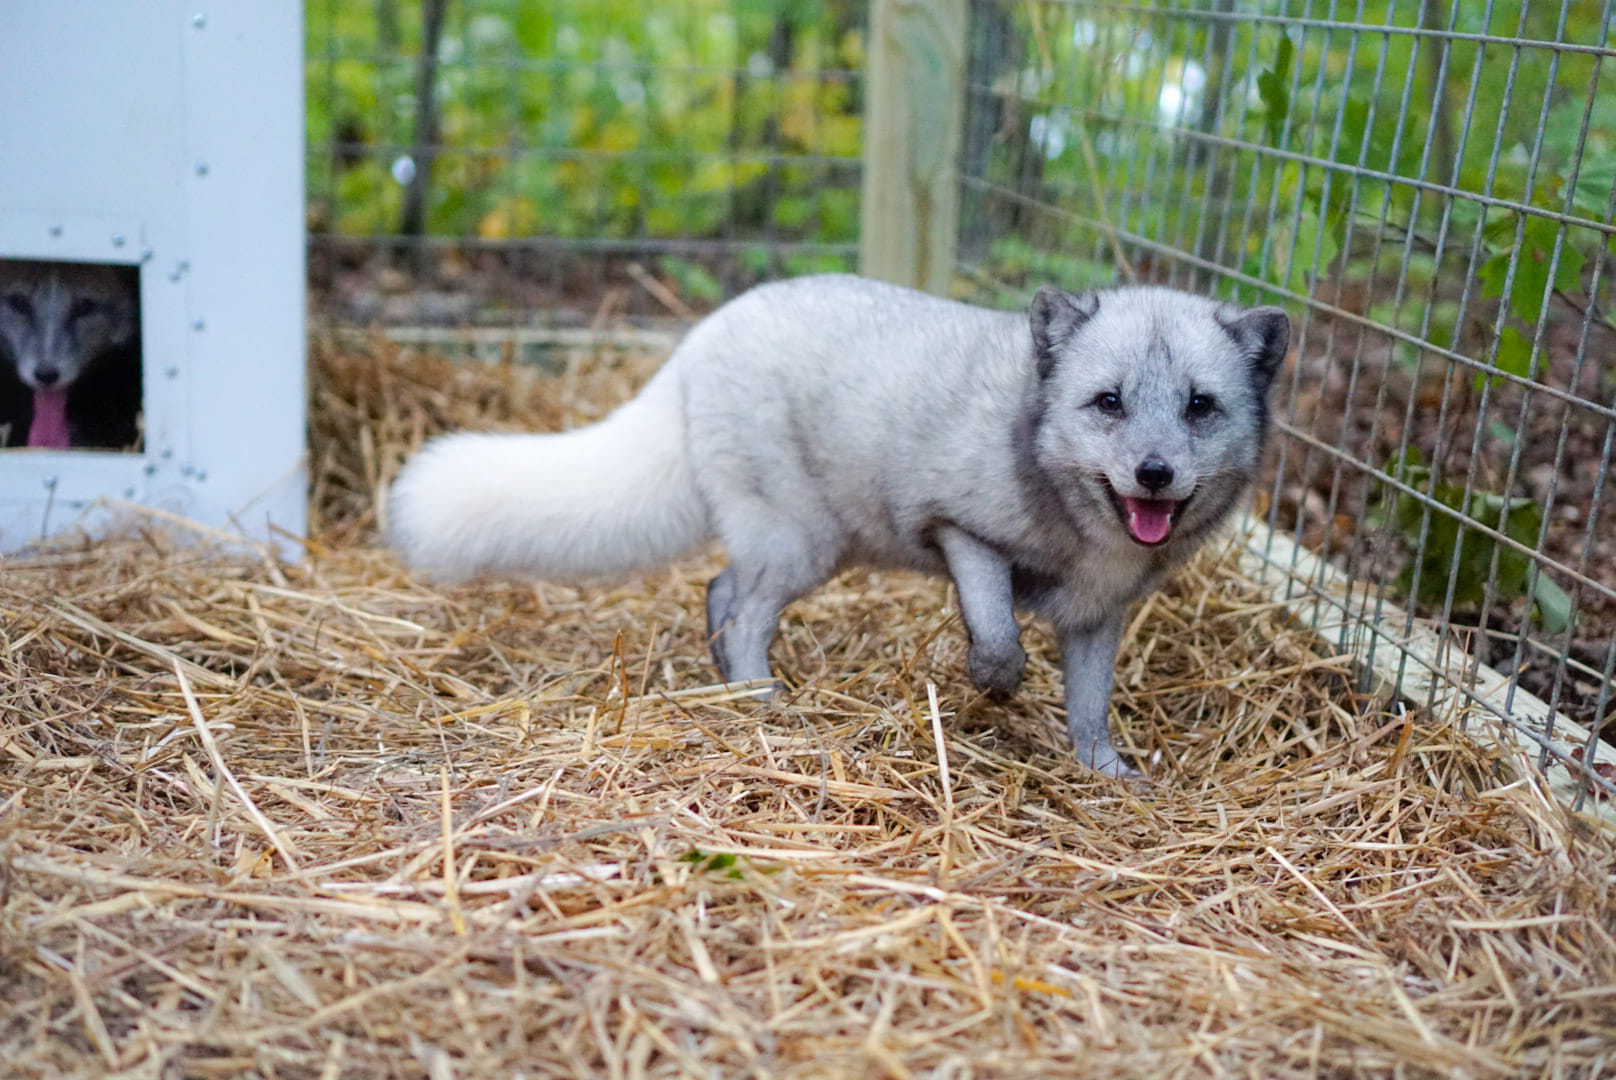 A photo of a pet arctic fox standing in an enclosure at an exotic pet sanctuary in tennessee